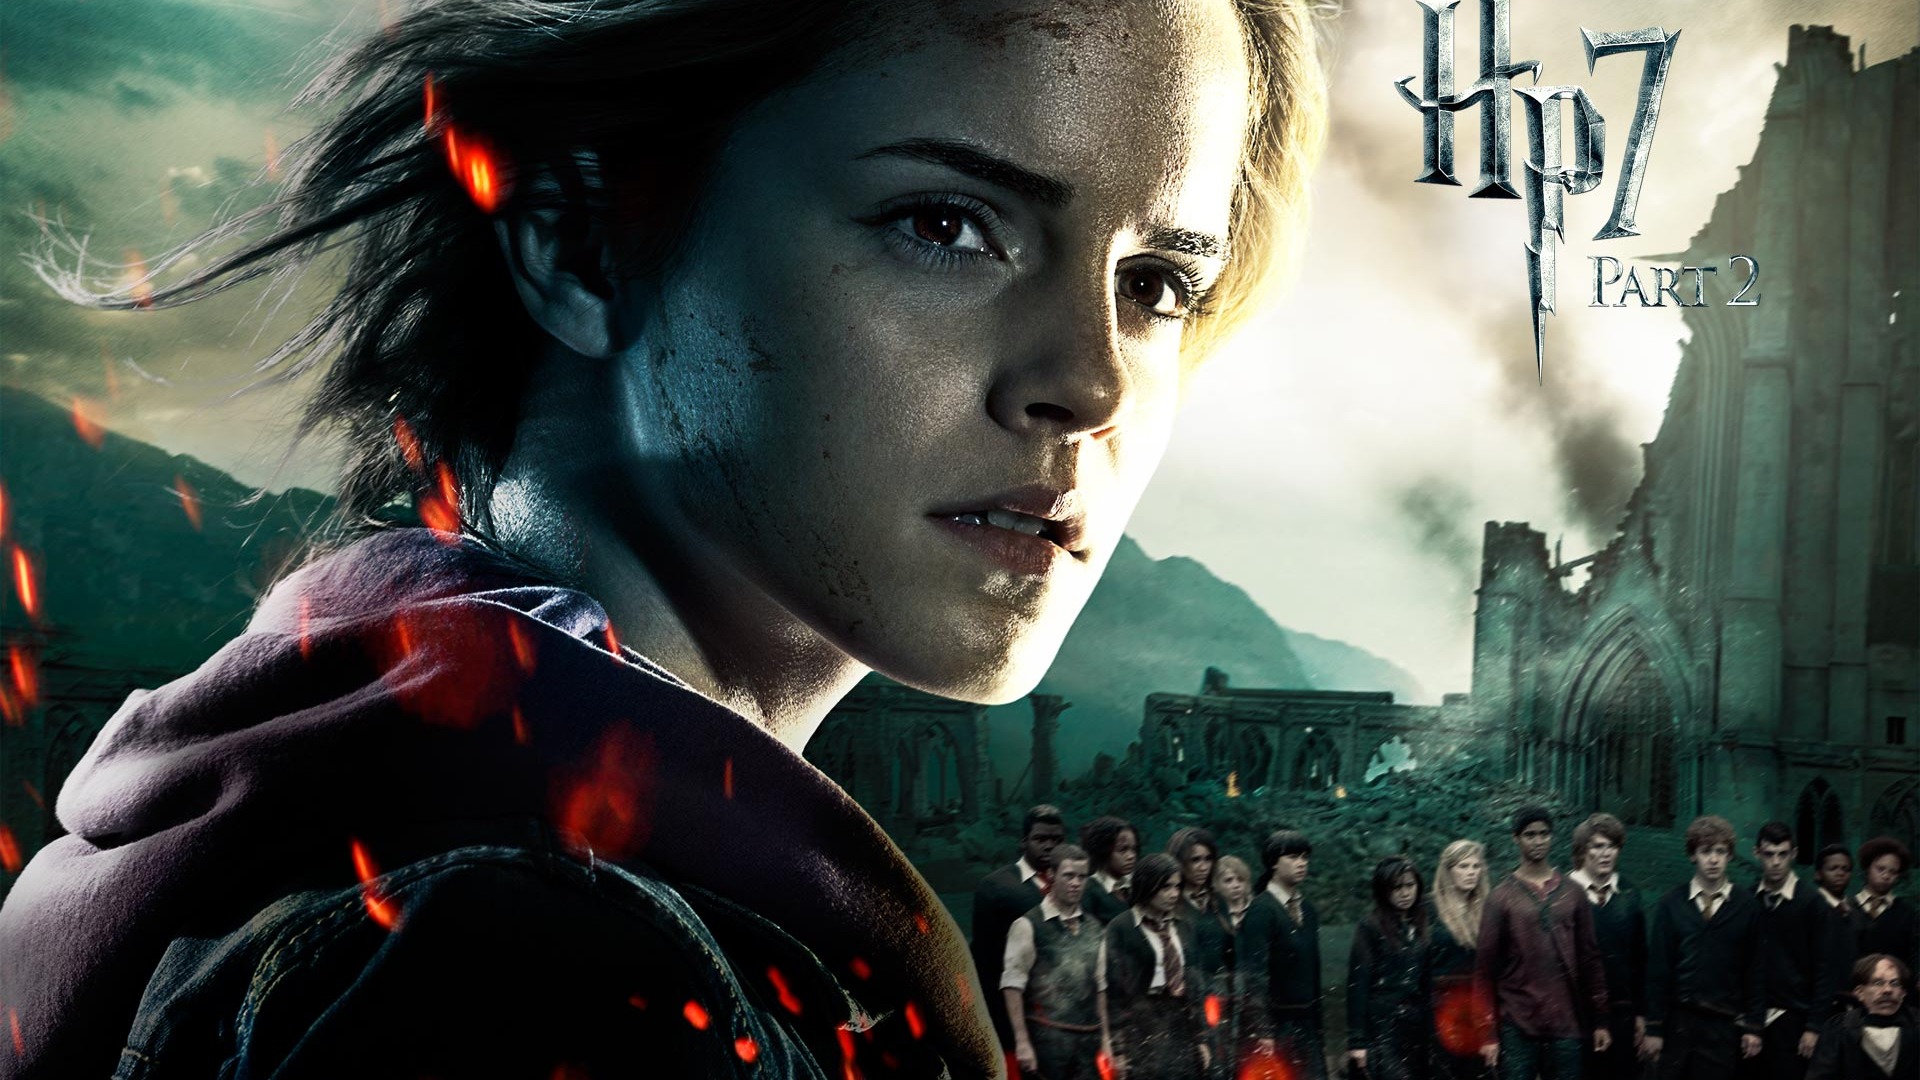 2011 Harry Potter and the Deathly Hallows HD wallpapers #12 - 1920x1080